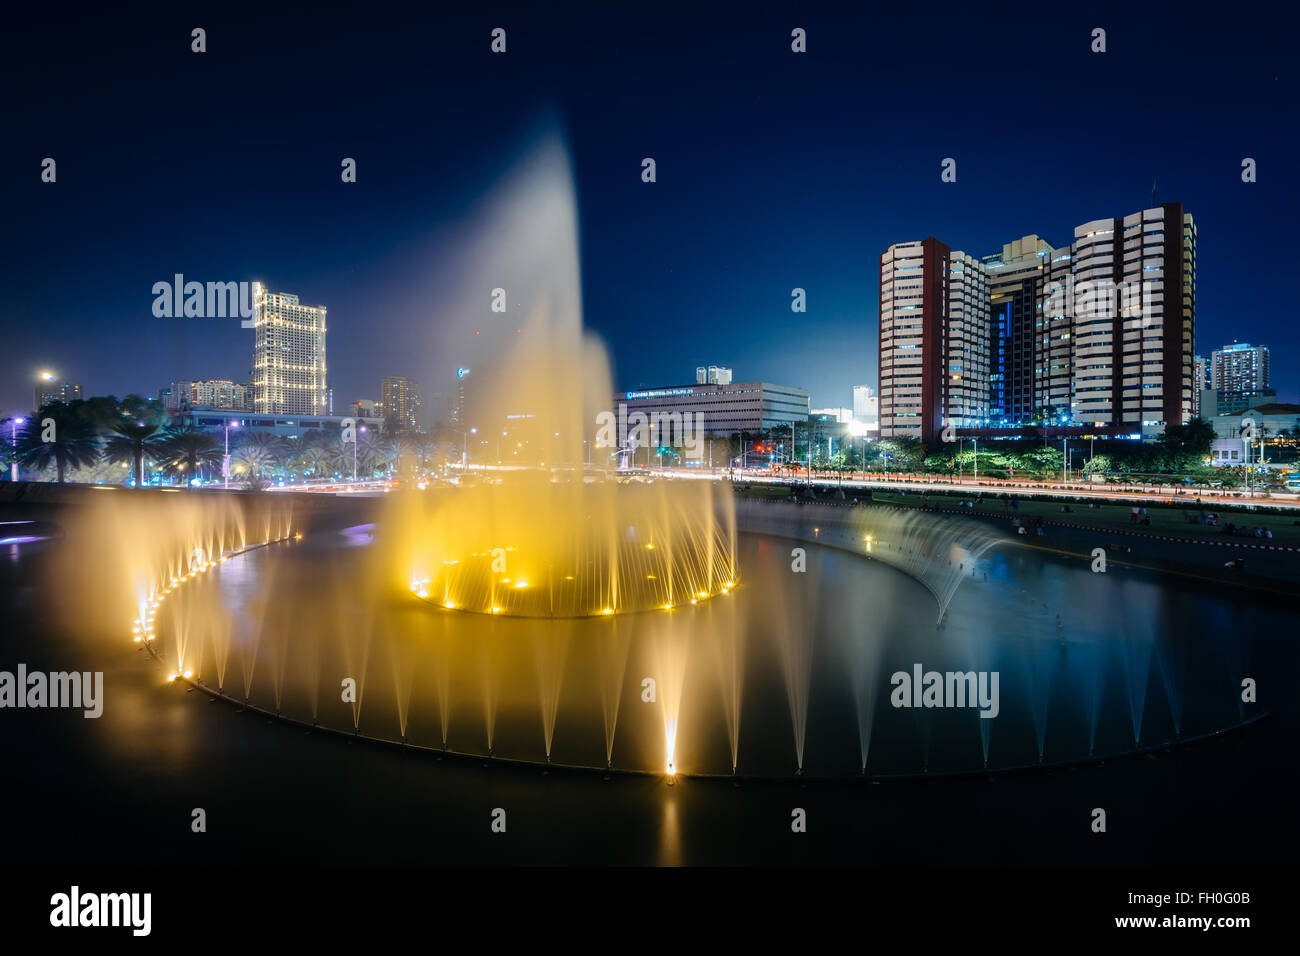 Fountain and modern buildings at night, in Pasay, Metro Manila, The Philippines. Stock Photo